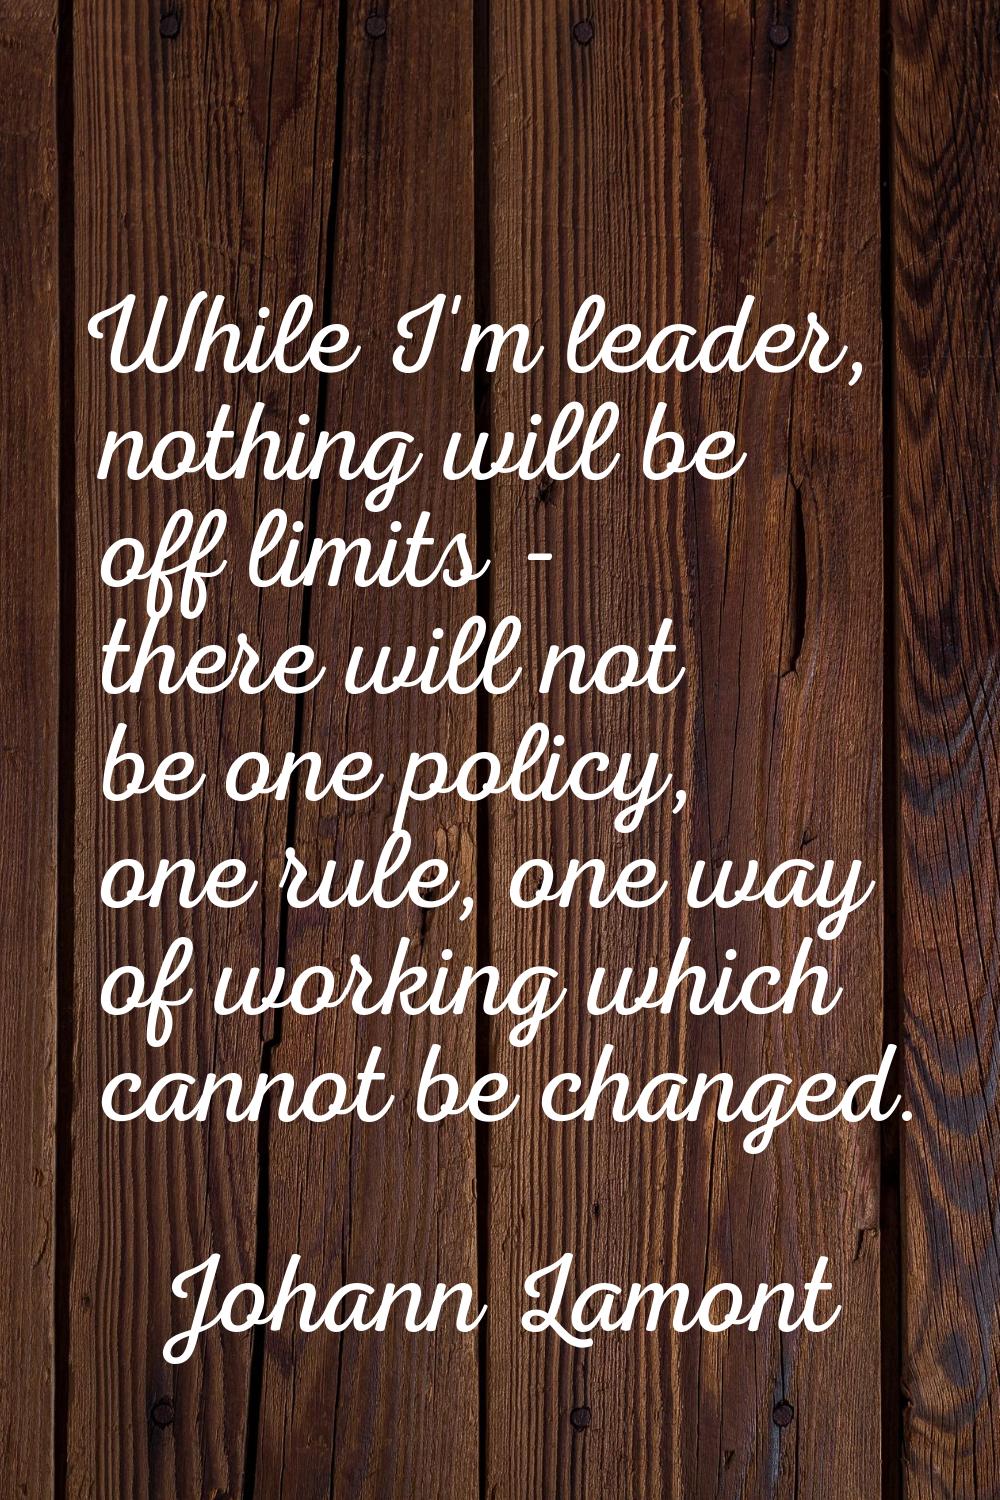 While I'm leader, nothing will be off limits - there will not be one policy, one rule, one way of w